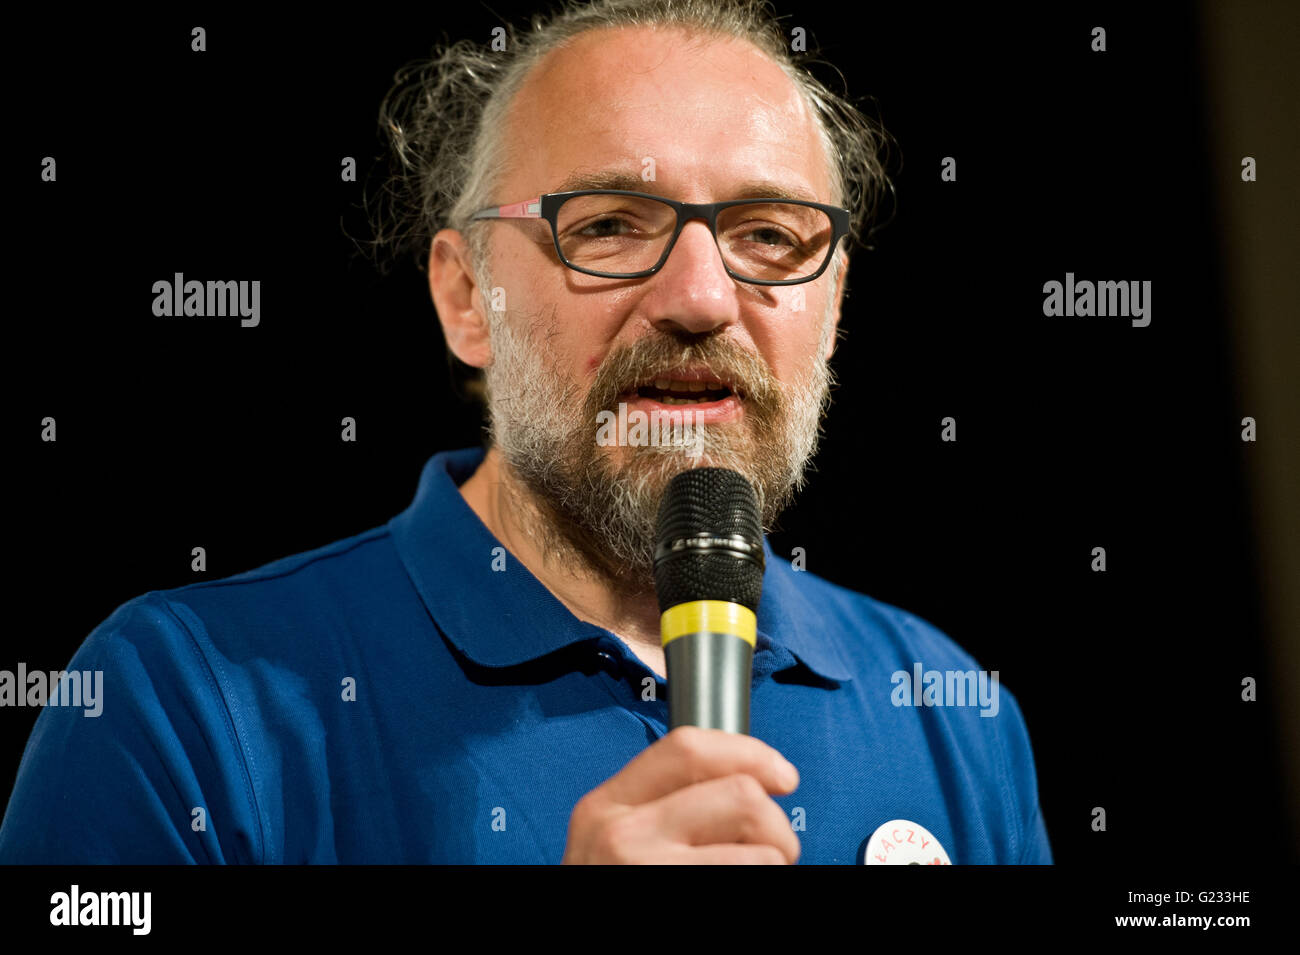 Wroclaw, Poland. 22nd May, 2016. Leader of Komitet Obrony Demokracji (Committee for the Defence of Democracy), Mateusz Kijowski, pictured during meeting with his supporters in Wroclaw.  Credit: Marcin Rozpedowski/Alamy Live News Stock Photo